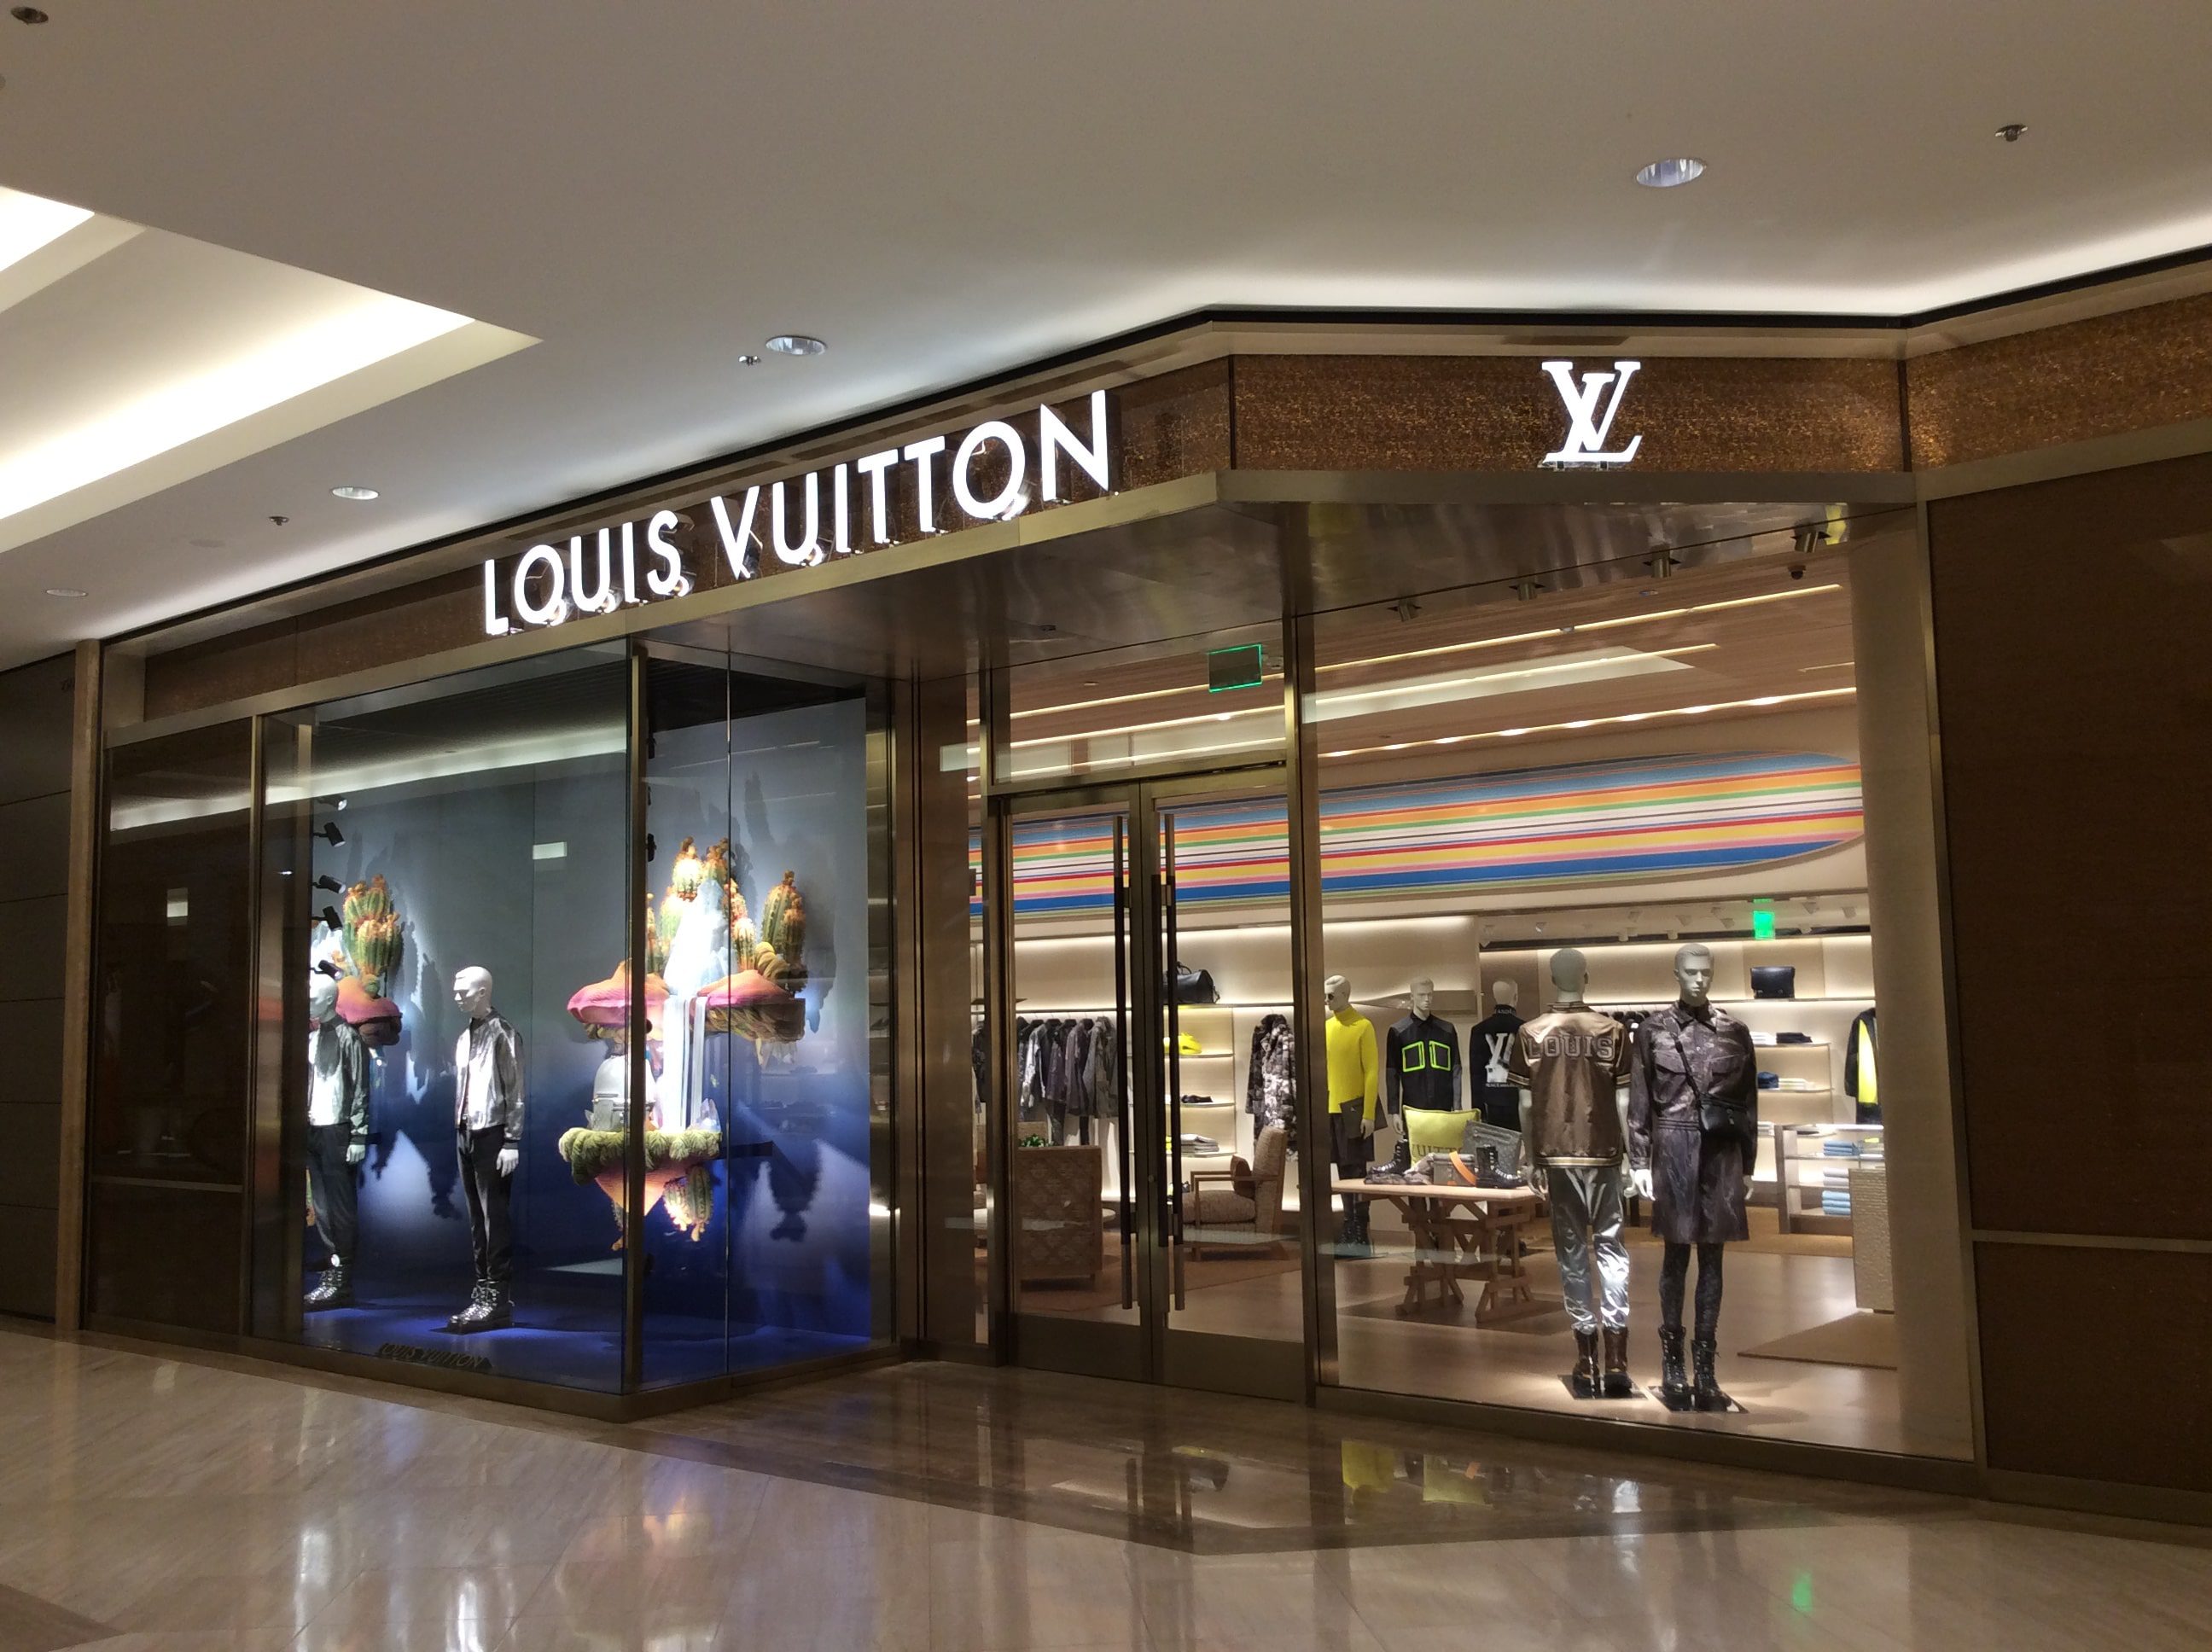 Louis Vuitton In Bloomingdale's South Coast Plaza